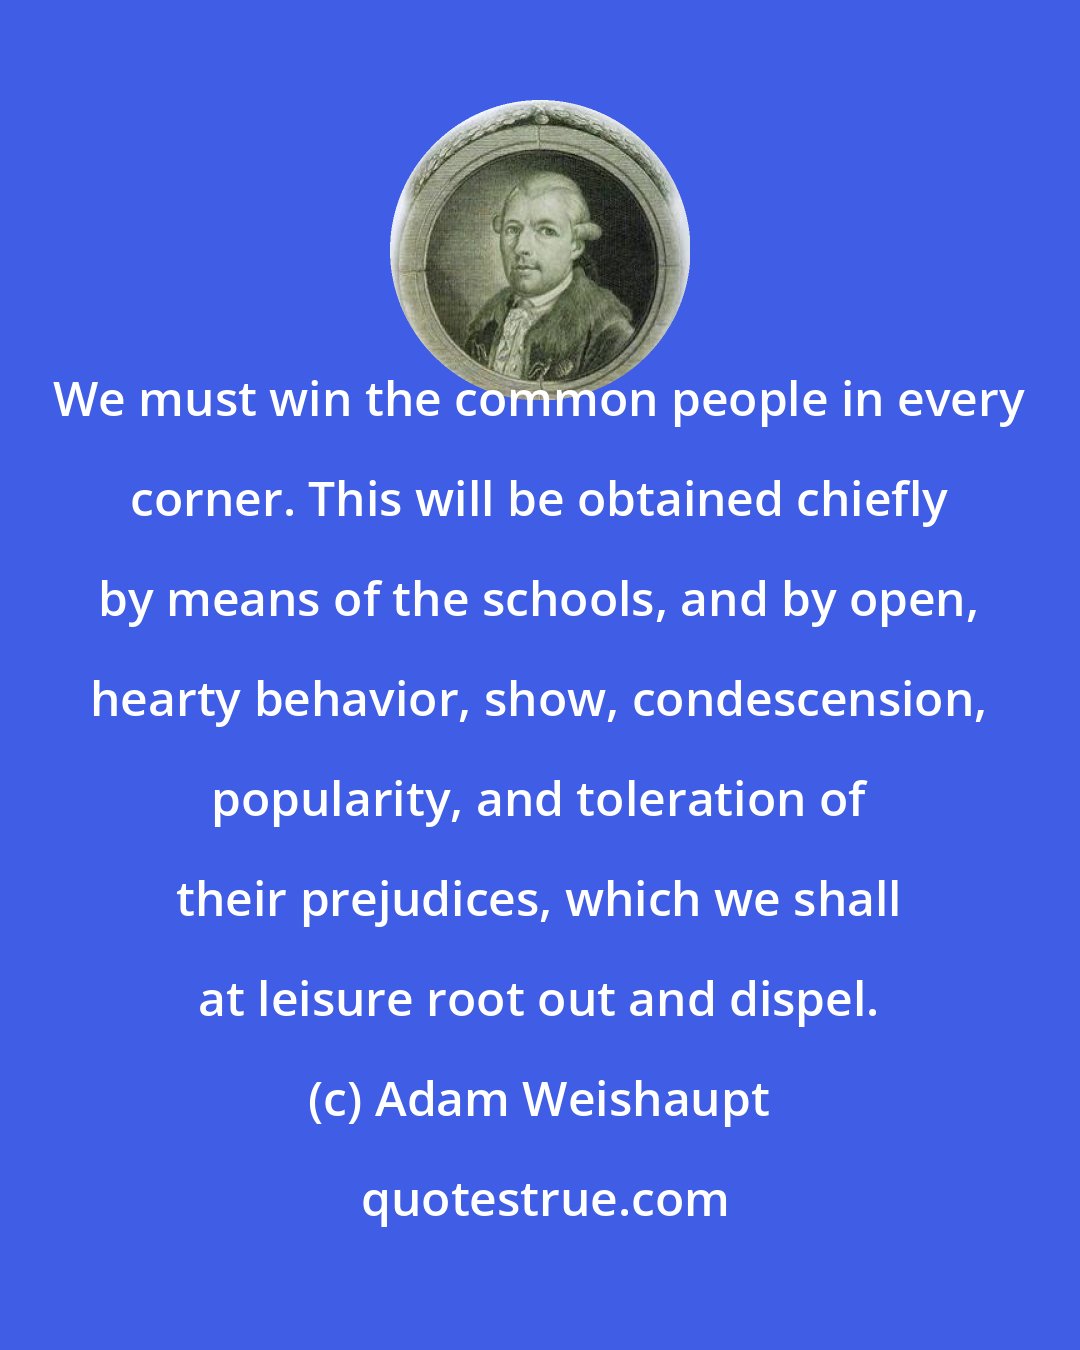 Adam Weishaupt: We must win the common people in every corner. This will be obtained chiefly by means of the schools, and by open, hearty behavior, show, condescension, popularity, and toleration of their prejudices, which we shall at leisure root out and dispel.